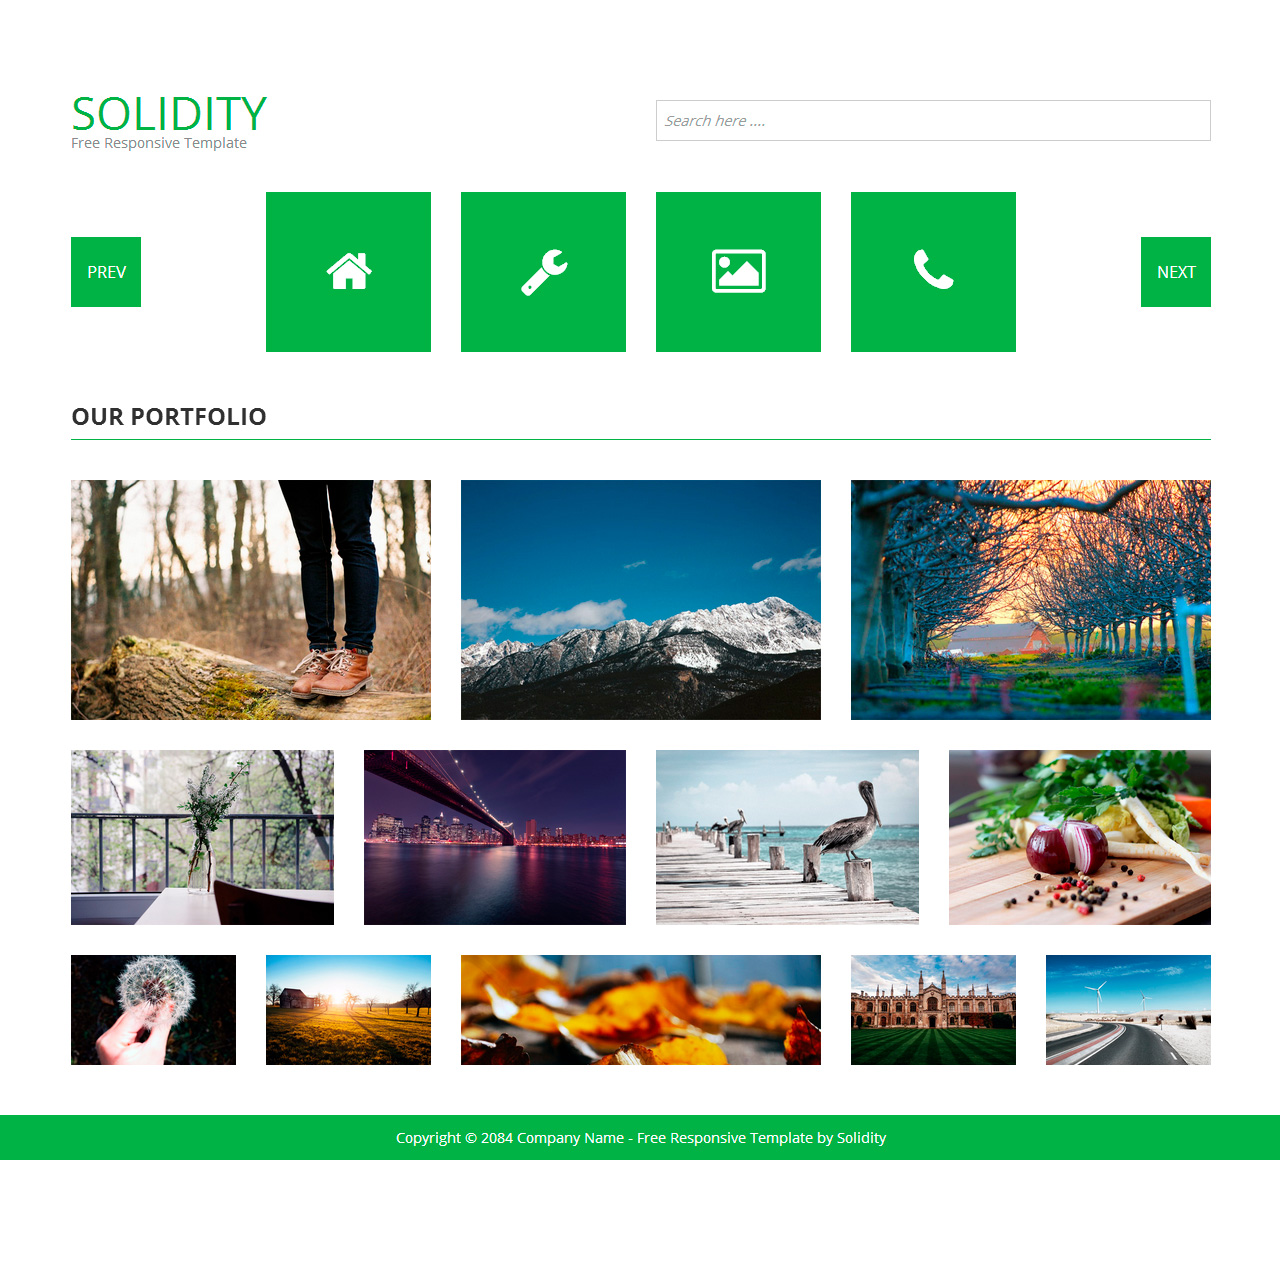 Bootstrap Image Gallery Template from templatemo.com